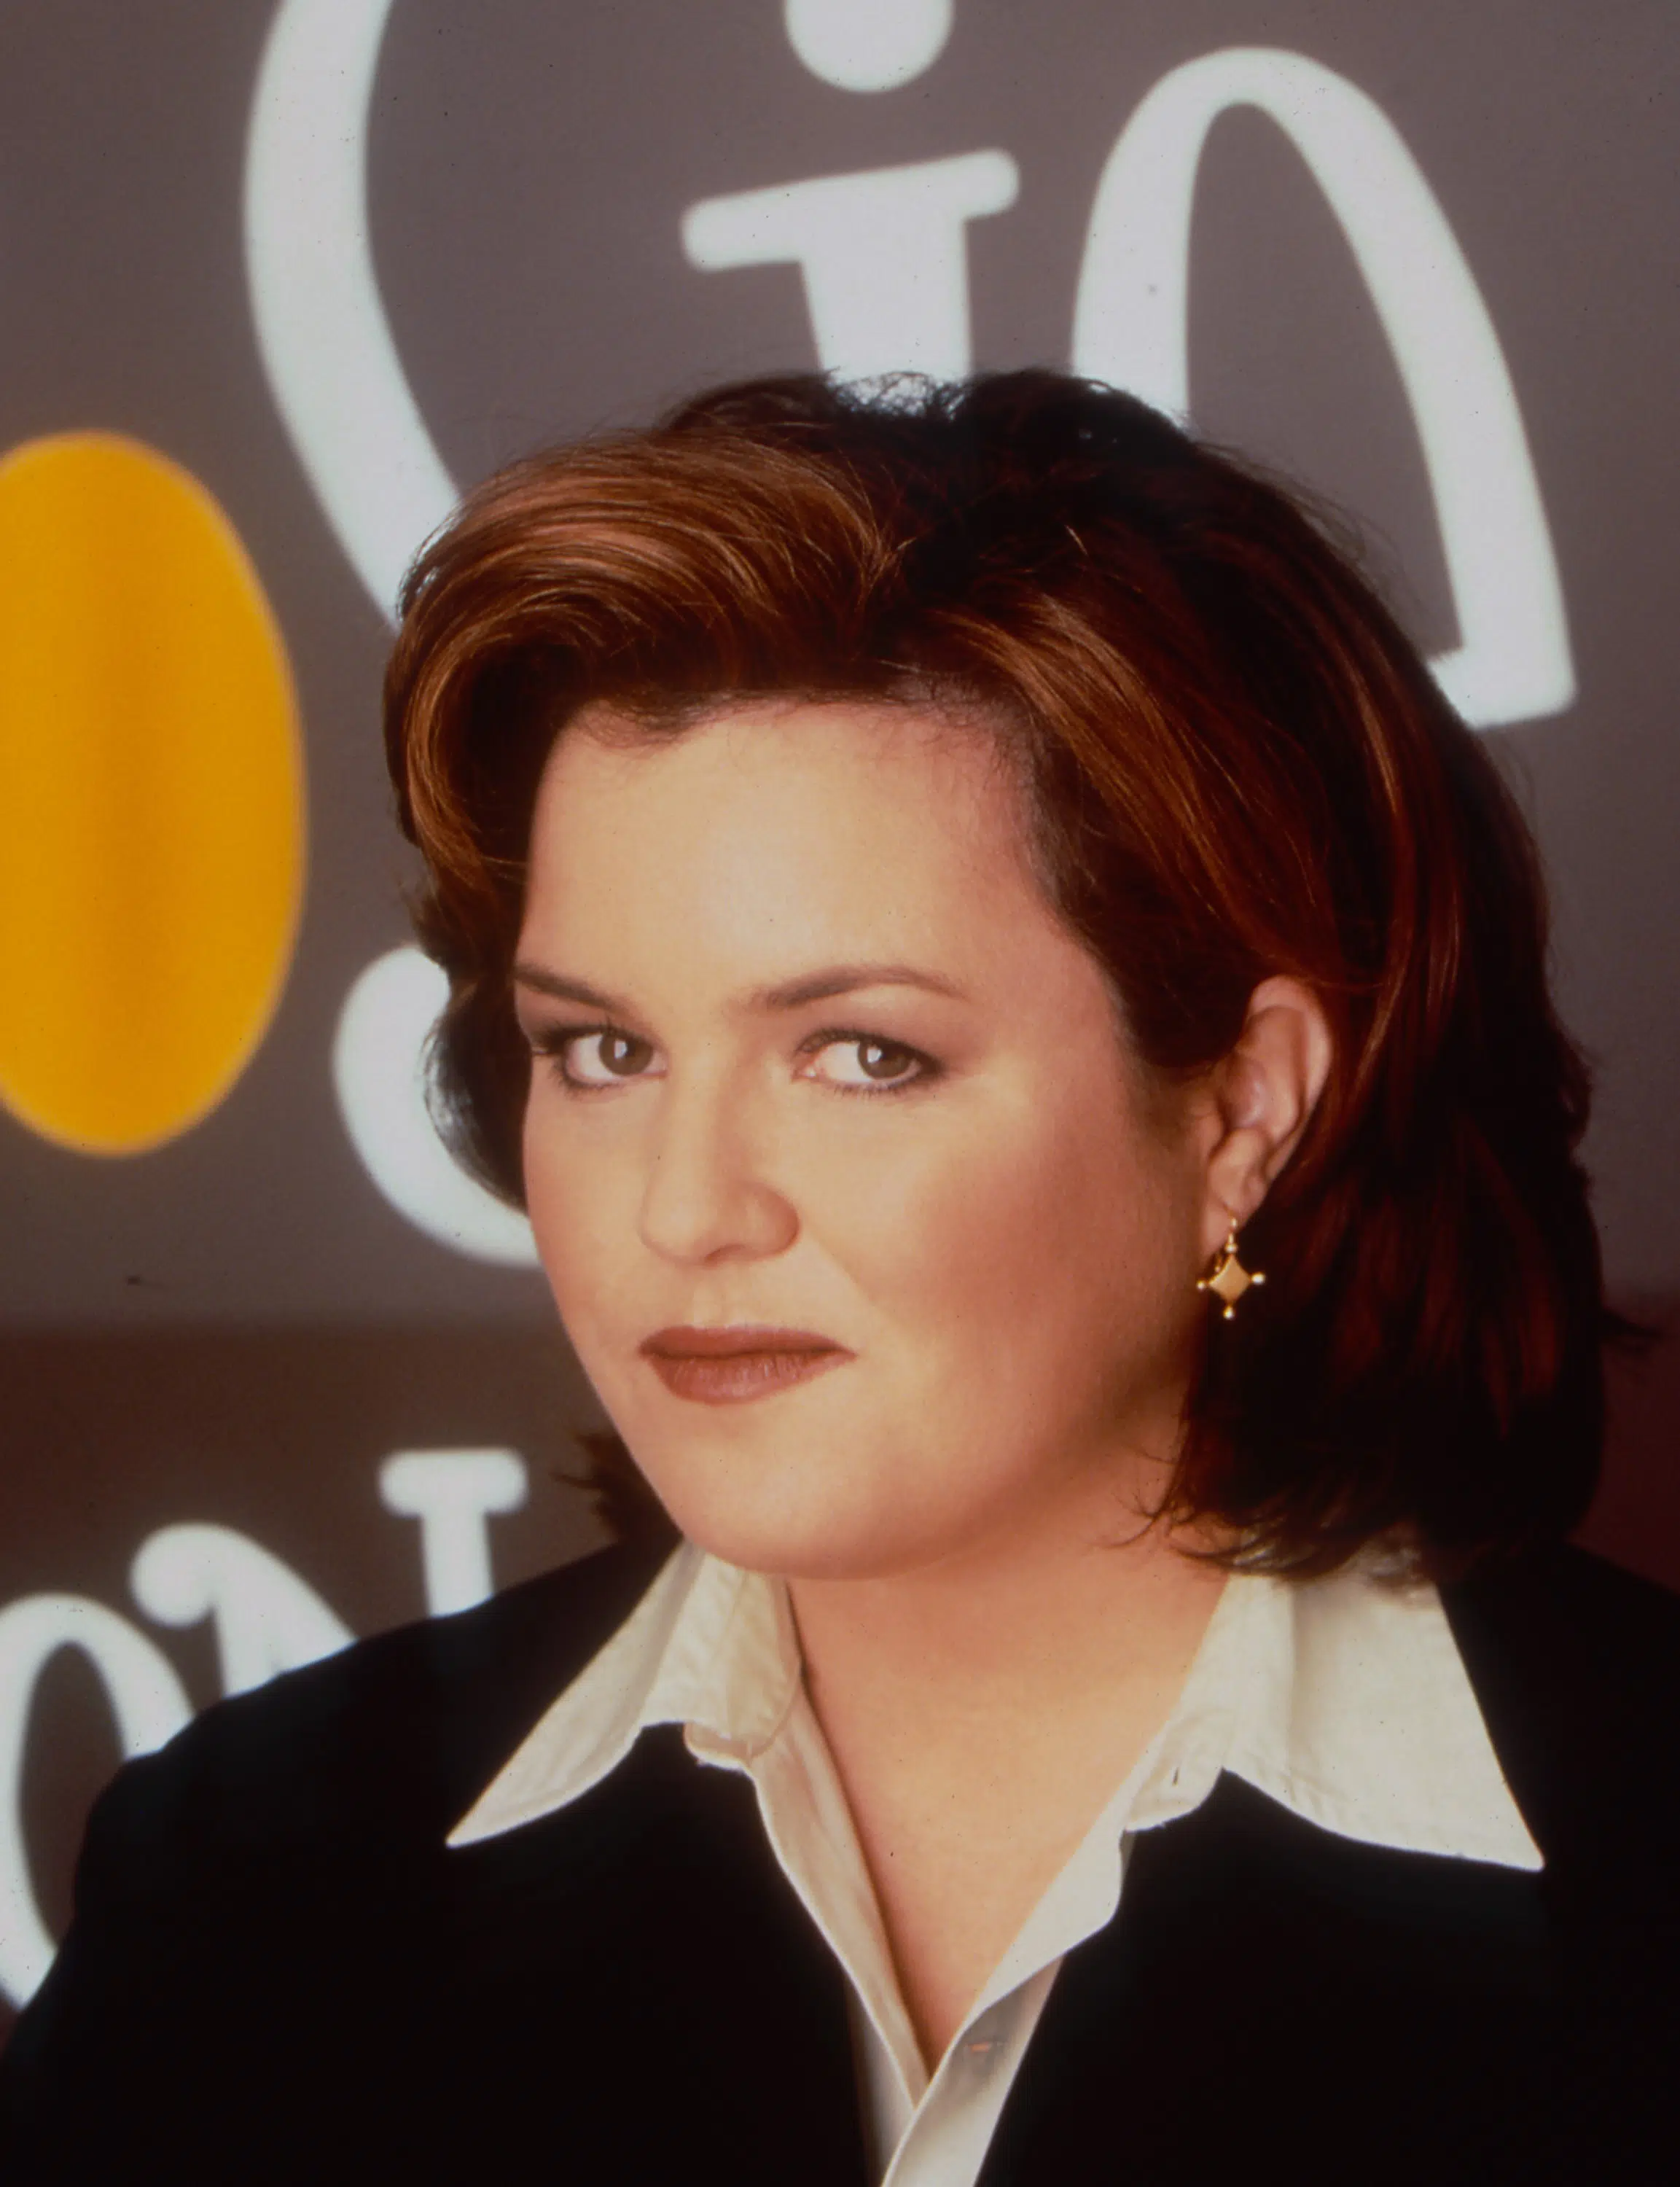 THE ROSIE O'DONNELL SHOW, Rosie O'Donnell, 1996-2002